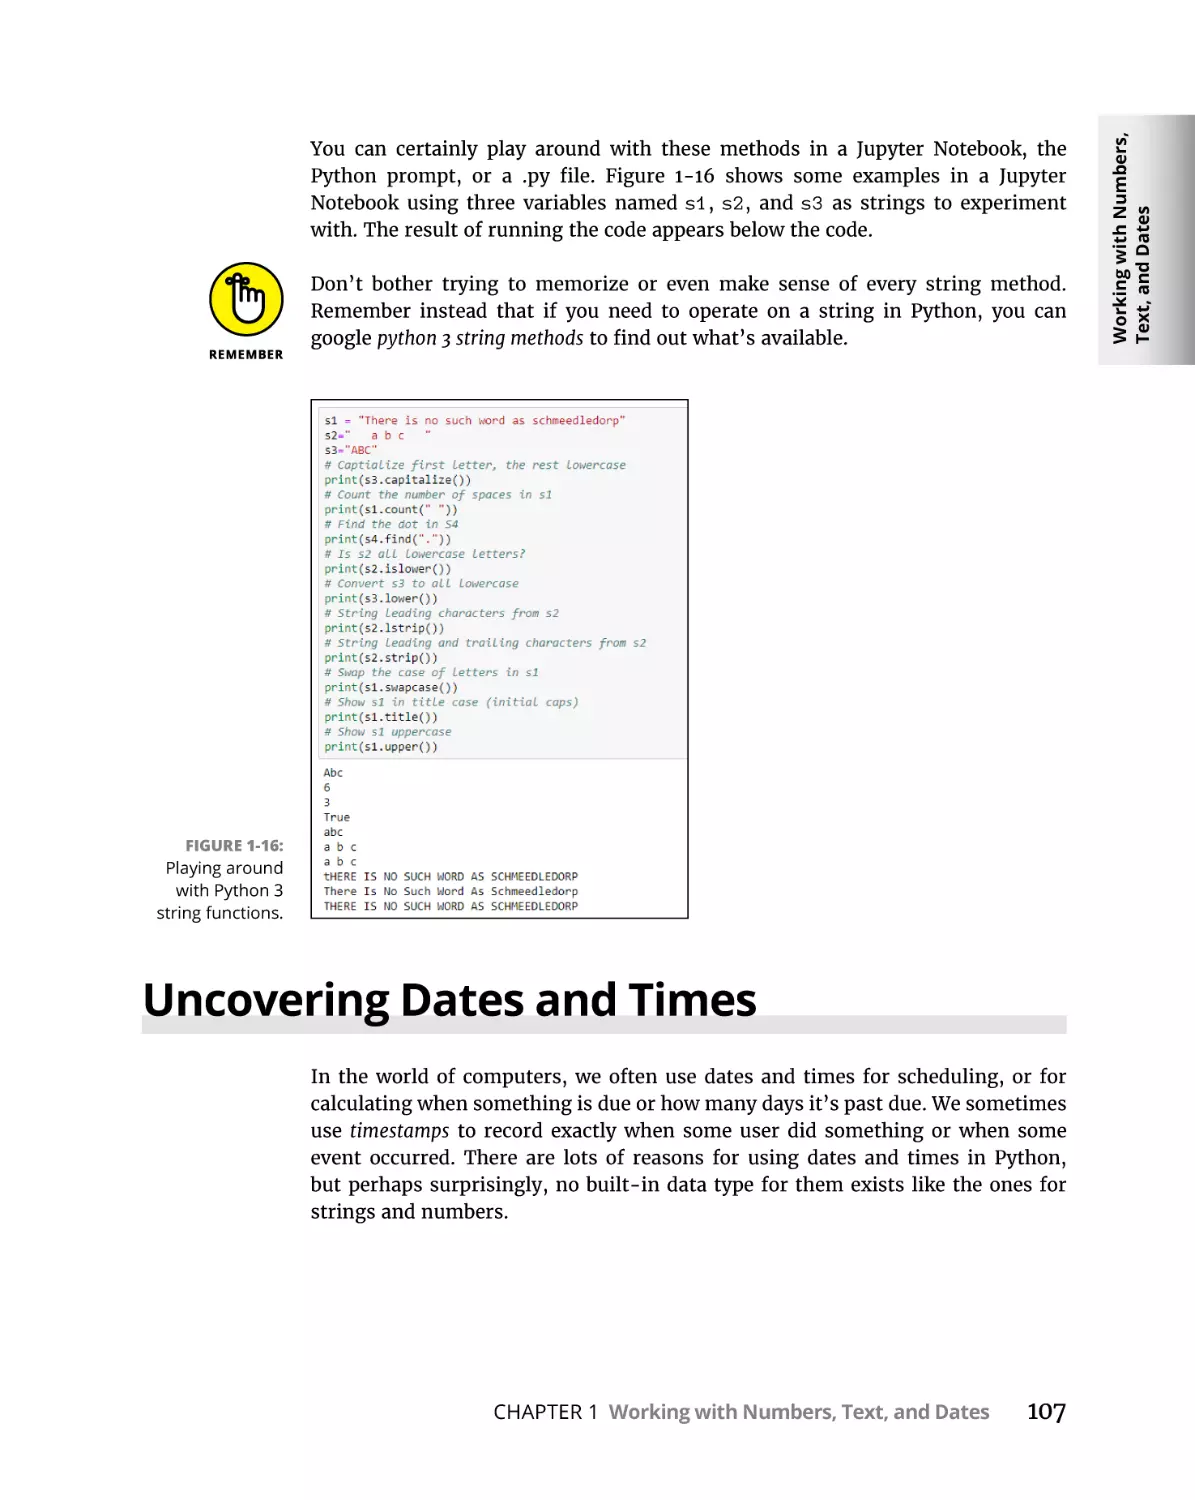 Uncovering Dates and Times